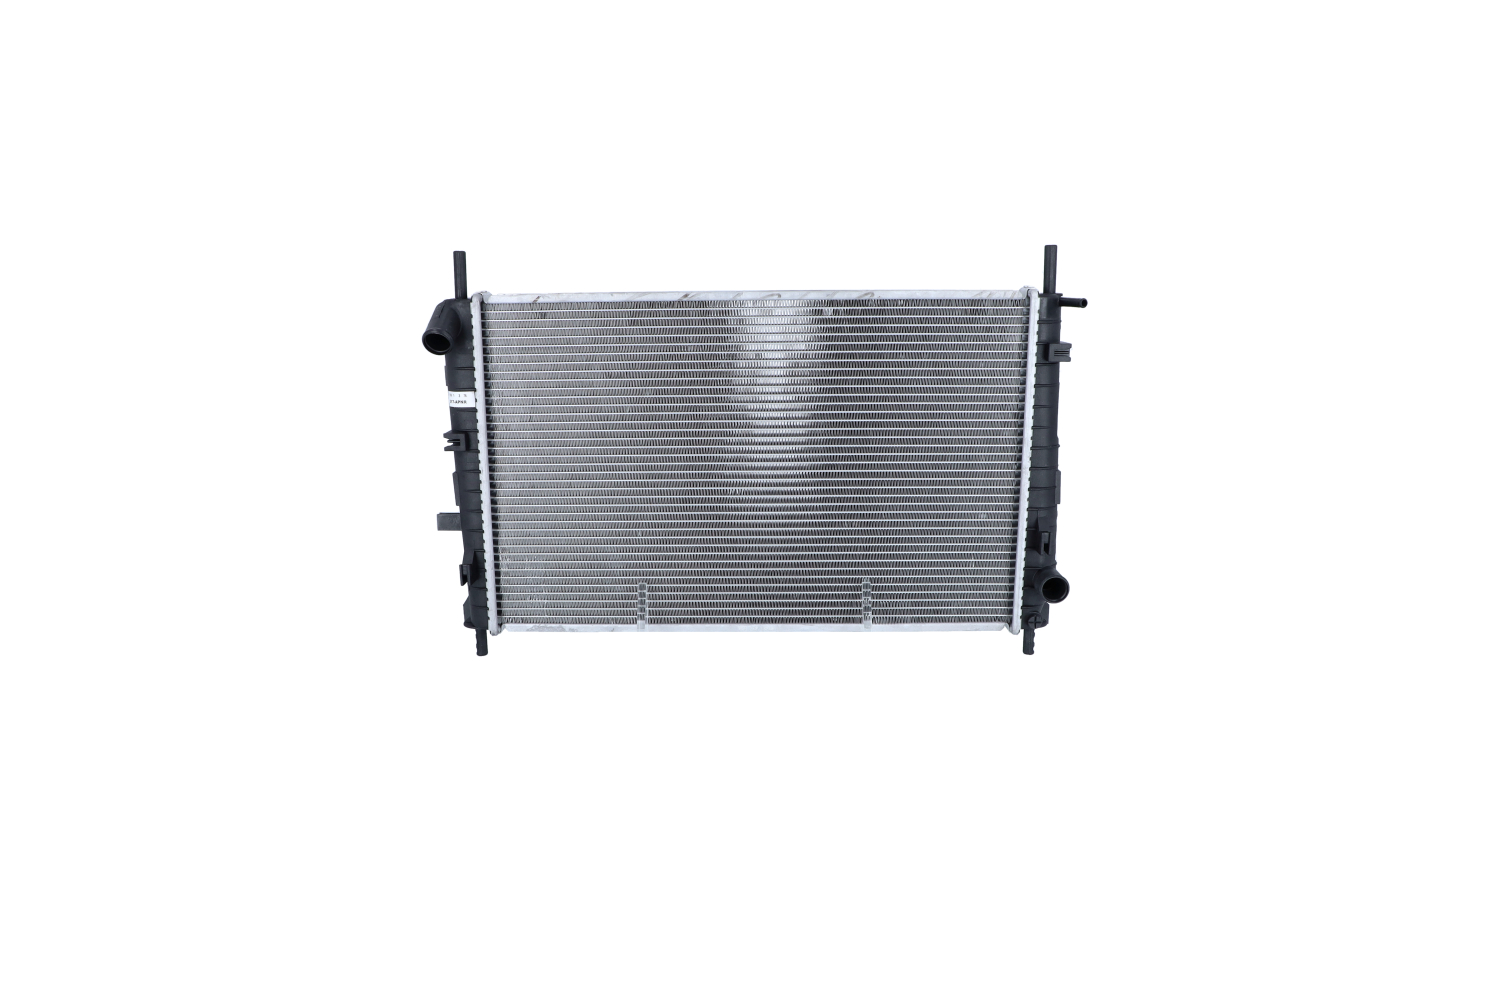 NRF 509527 Engine radiator Aluminium, 616 x 386 x 34 mm, with mounting parts, Brazed cooling fins